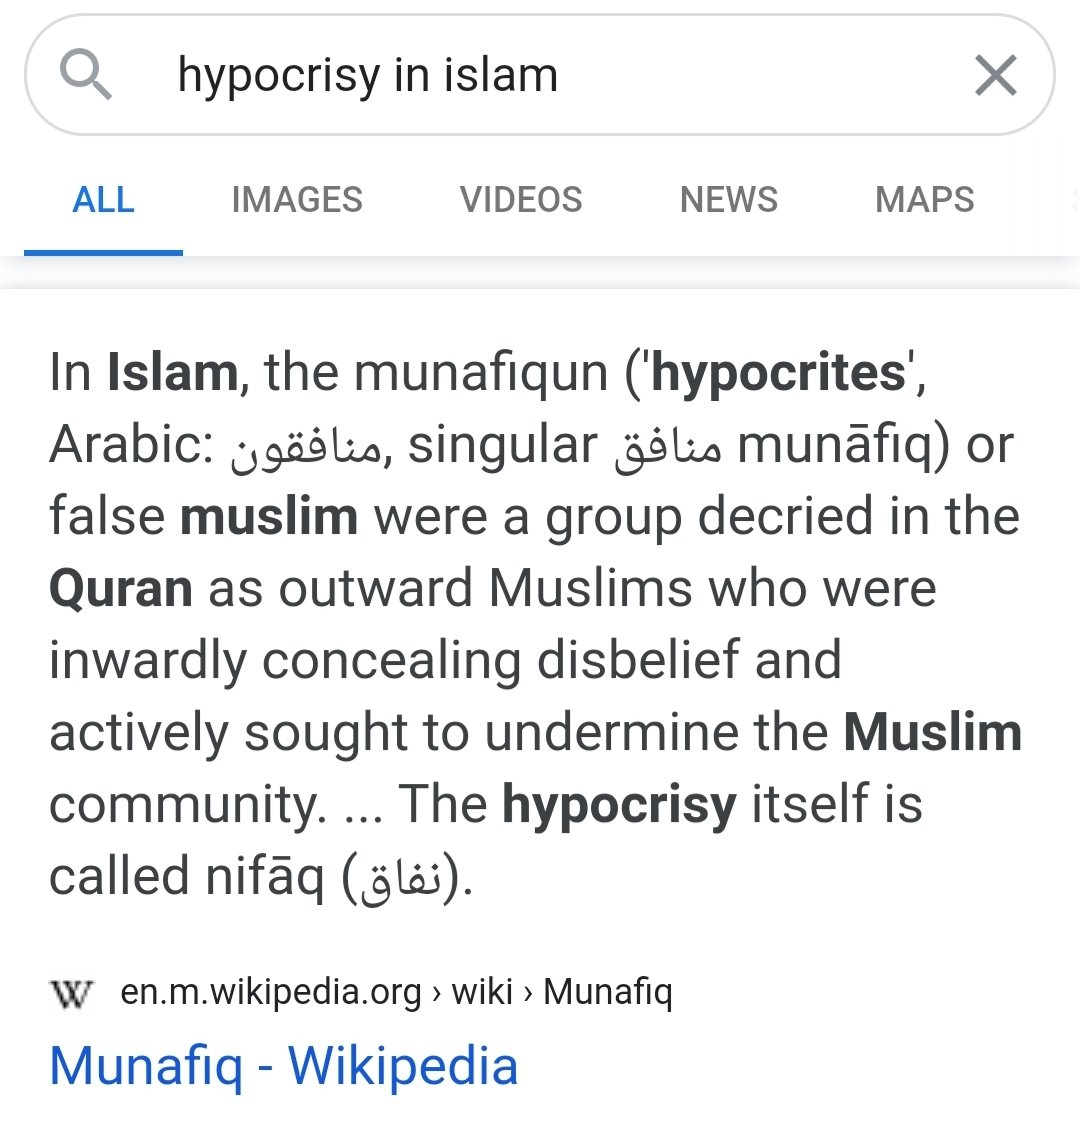 Go study the Qur'an. Study what is says about hypocrisy, then evaluate yourself. There's a reason why “Afalaa Tatafakkarun” (don’t you think?) and “Afala Ta’qilun” (don’t you use your wits?) is consistently mentioned in the Qur'an. Do a better job of portraying Islam to the world